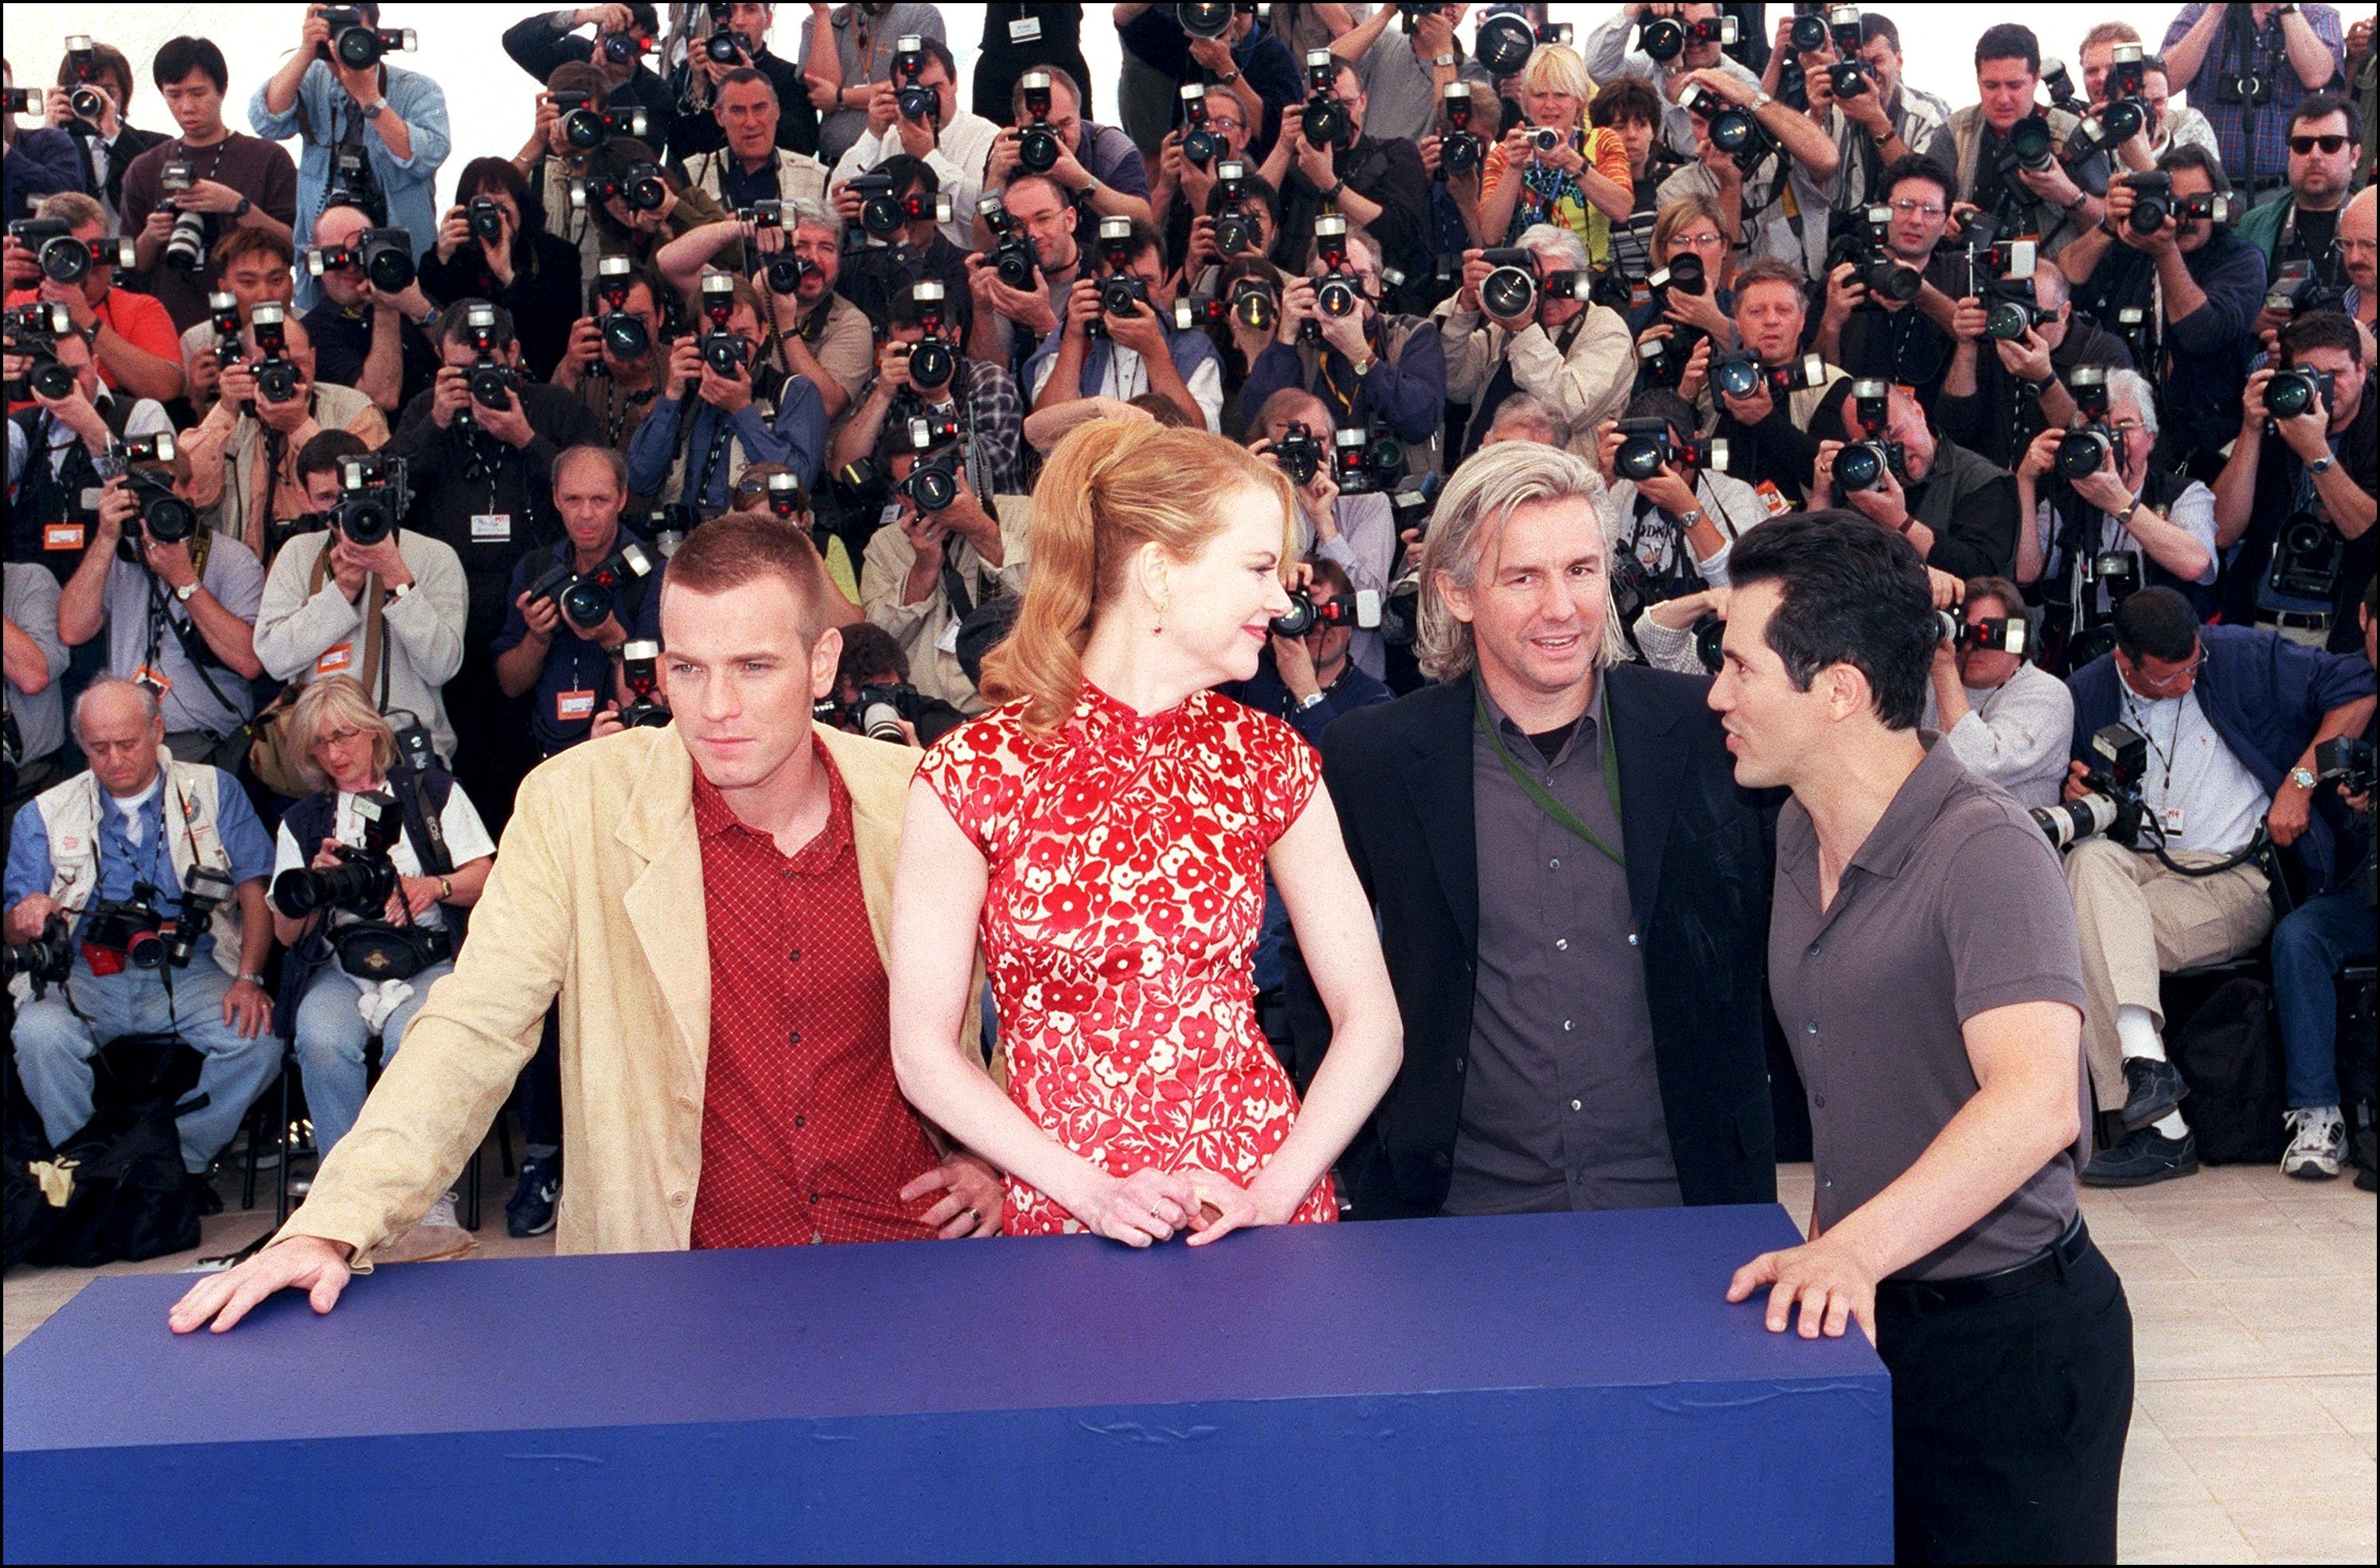 2001-05-07-54th-Cannes-Film-Festival-Moulin-Rouge-Photocall-022.jpg